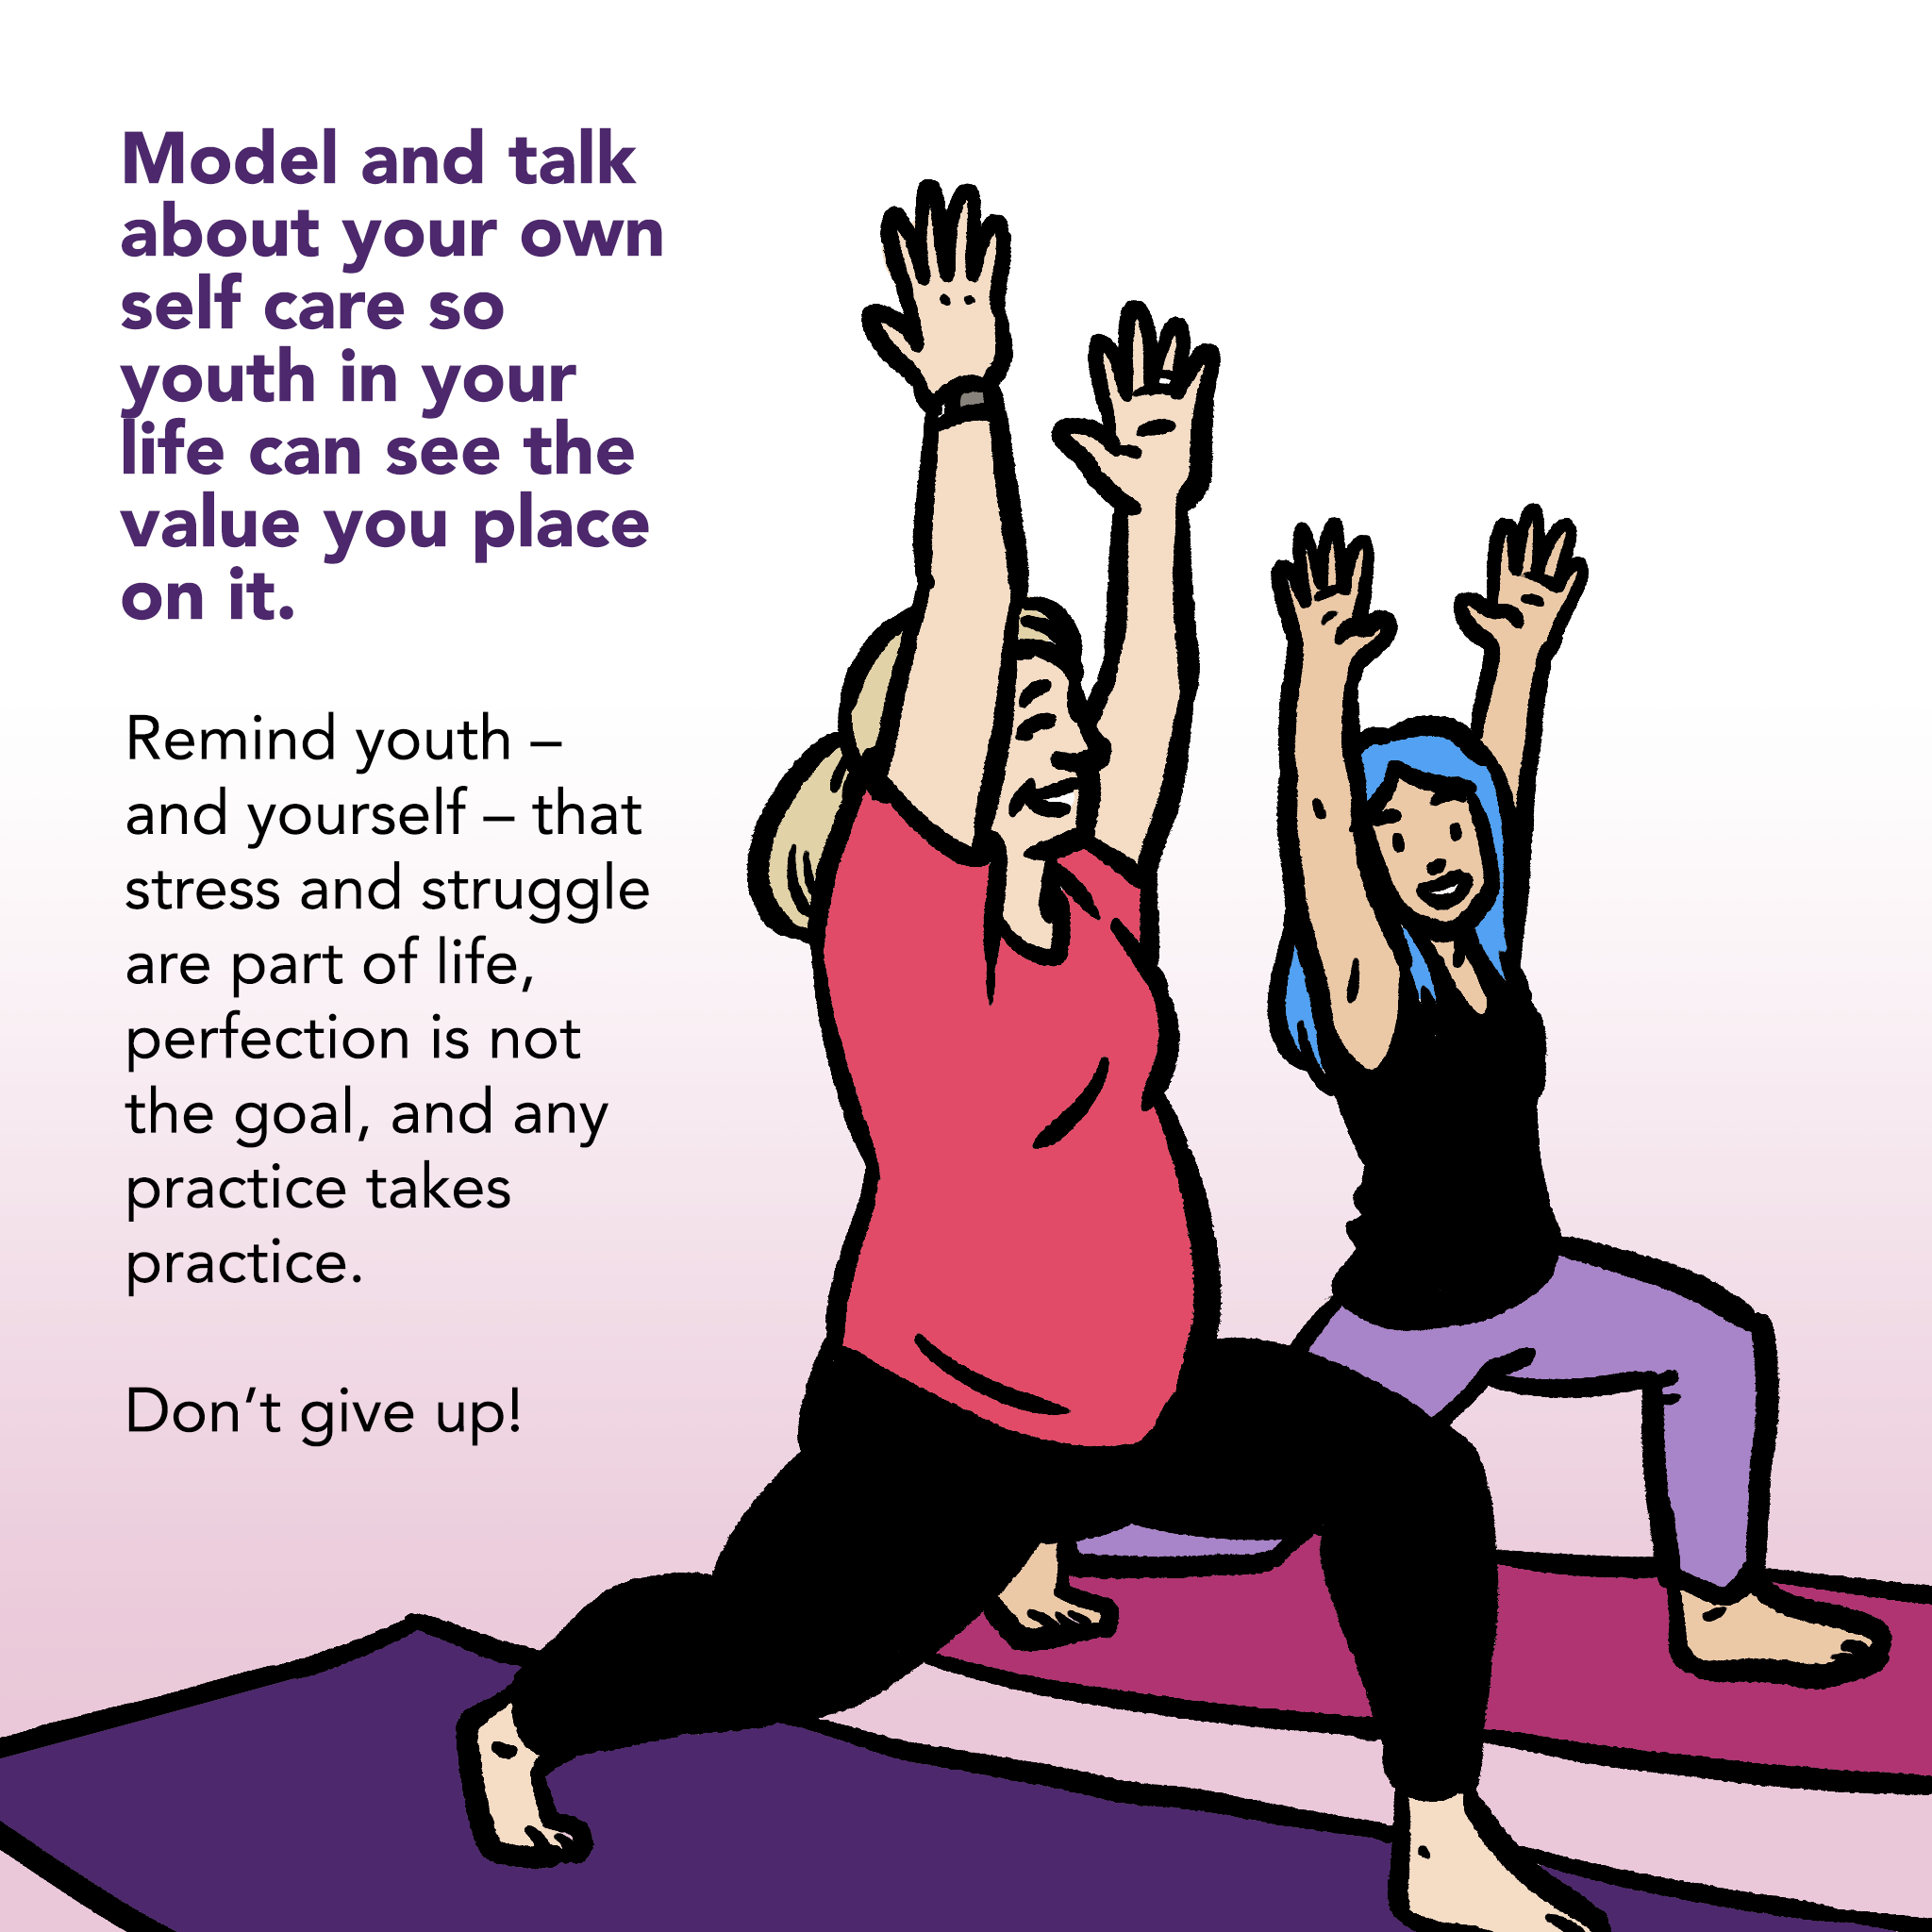 Image of an adult and a young person smiling, arms raised and lunging forward in a yoga posture. Text says "Model and talk about your own self care so youth in your life can see the value you place on it. Remind youth - and yourself - that stress and struggle are part of life, perfection is not the goal, and any practice takes practice. Don't give up!"